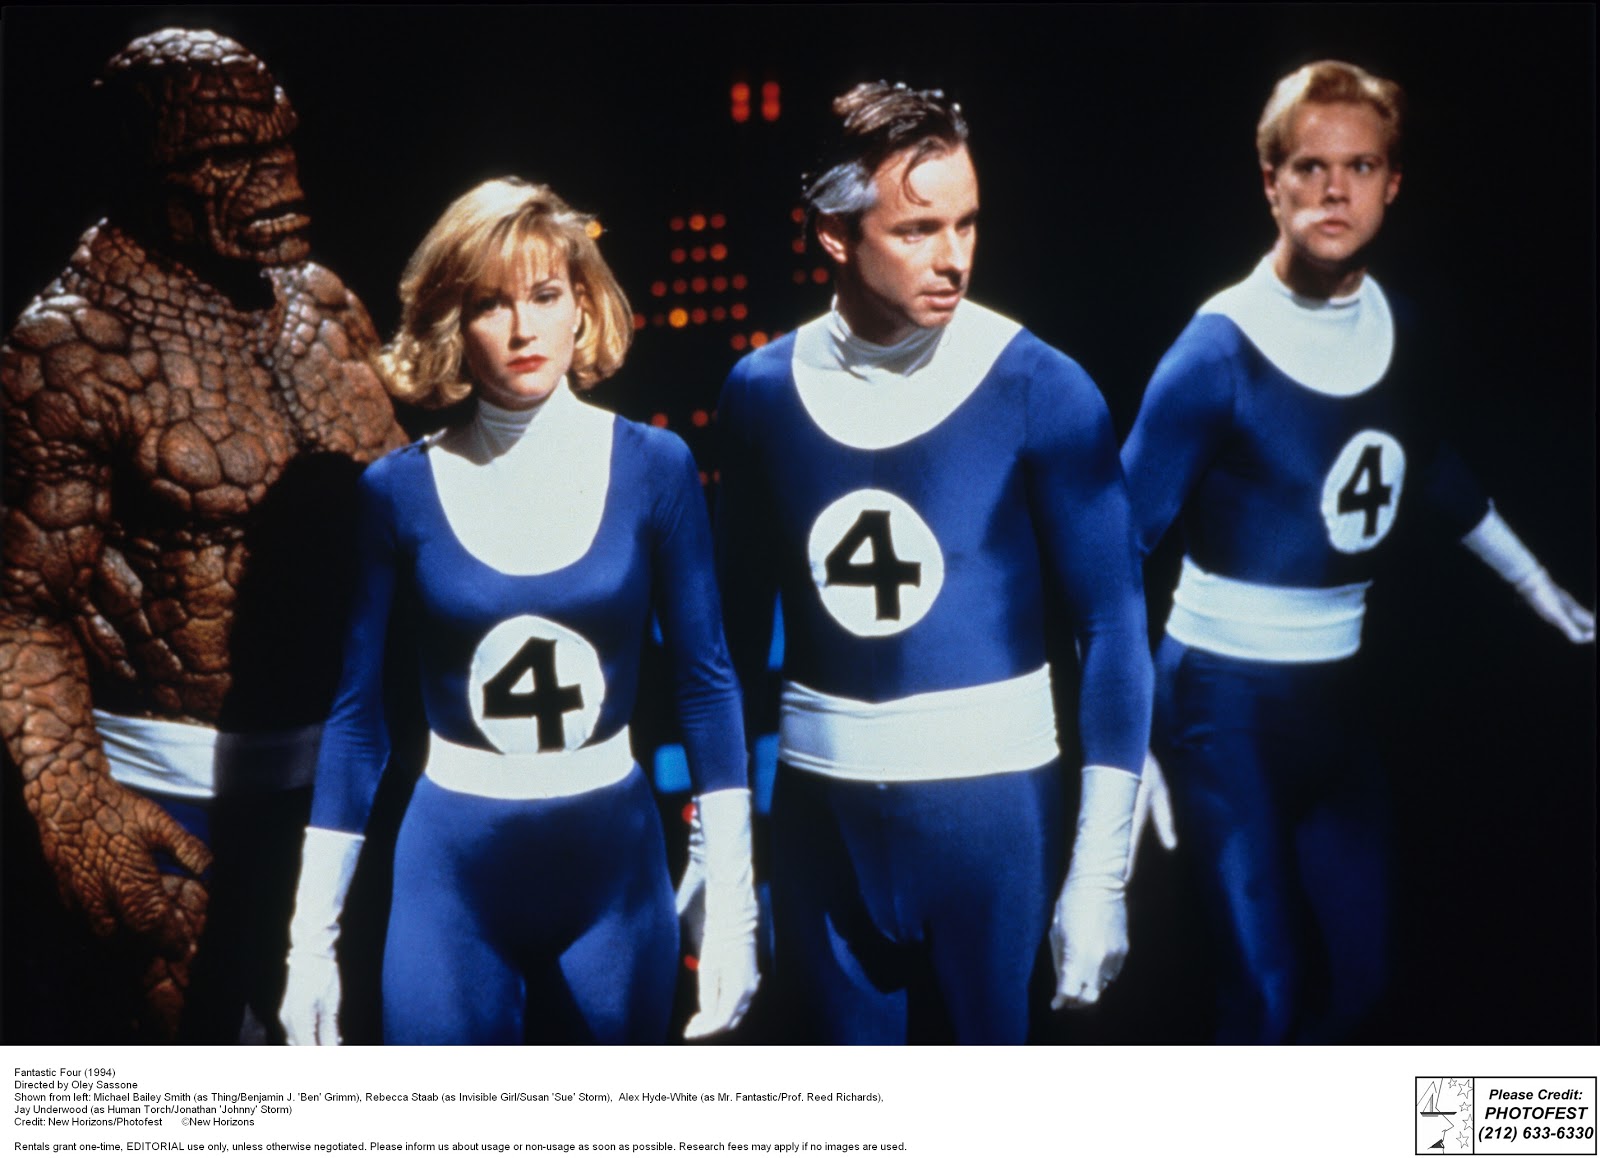 The original Fantastic Four from 1994 & Rodger Corman